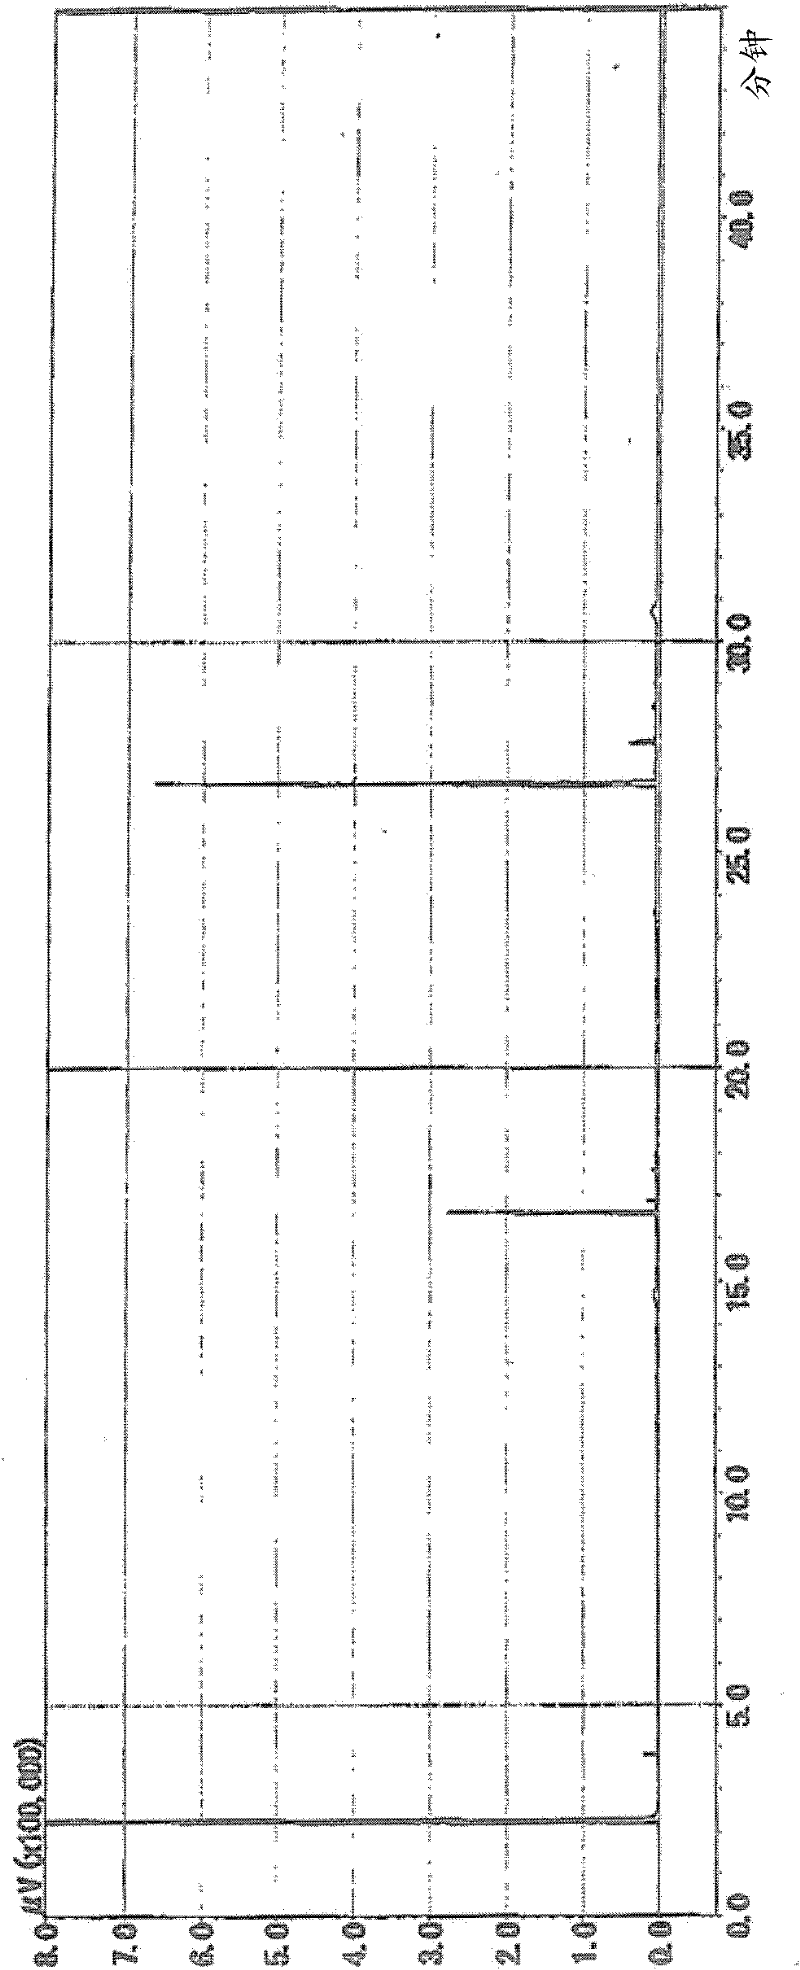 High adhesiveness silicone resin composition and an optical semiconductor device provided with a cured product thereof